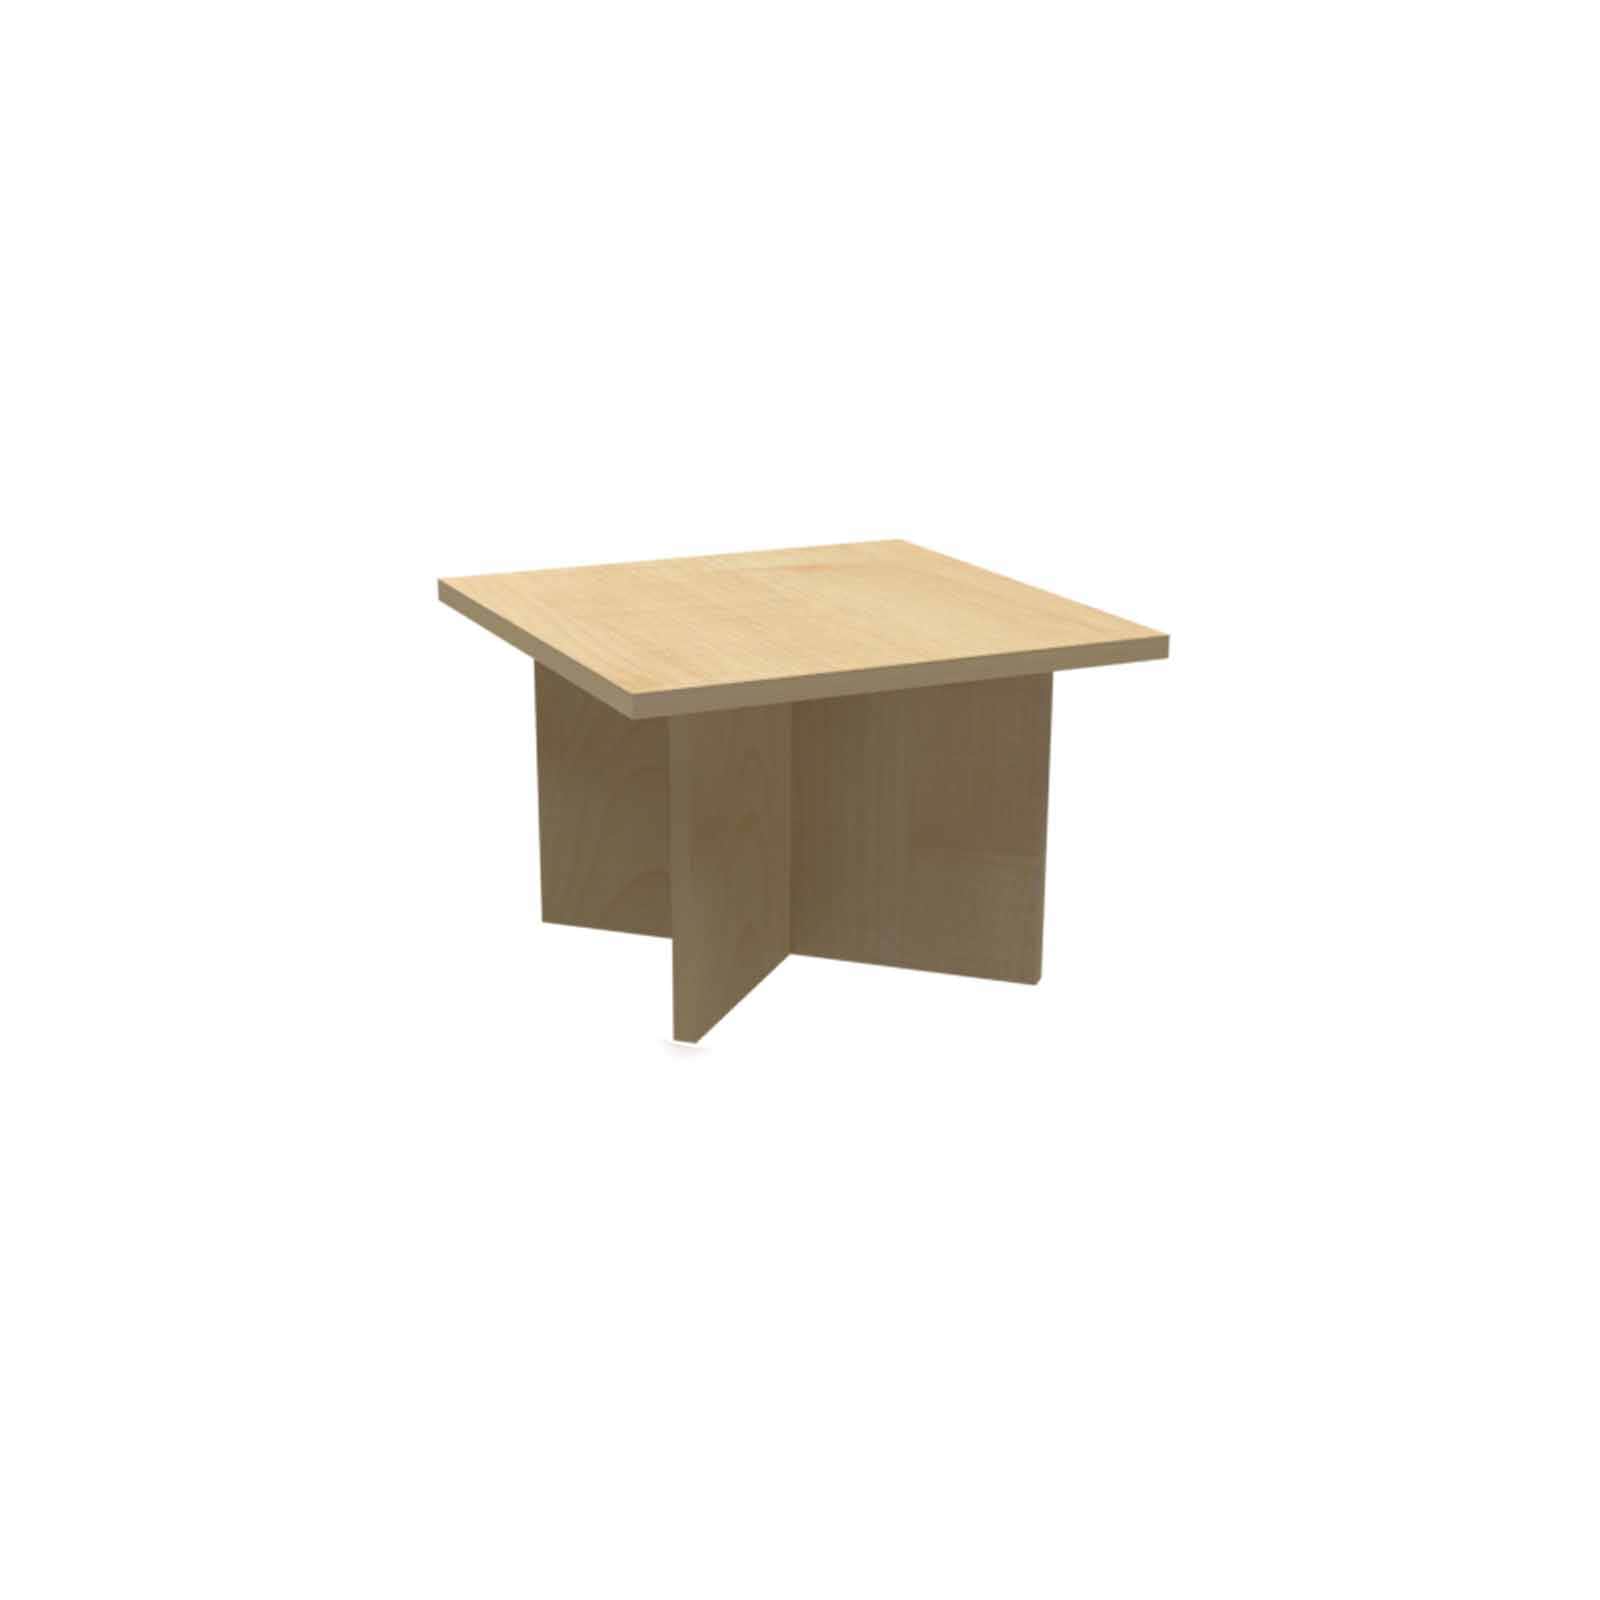 Square Coffee Table W600 x D600 x H400mm